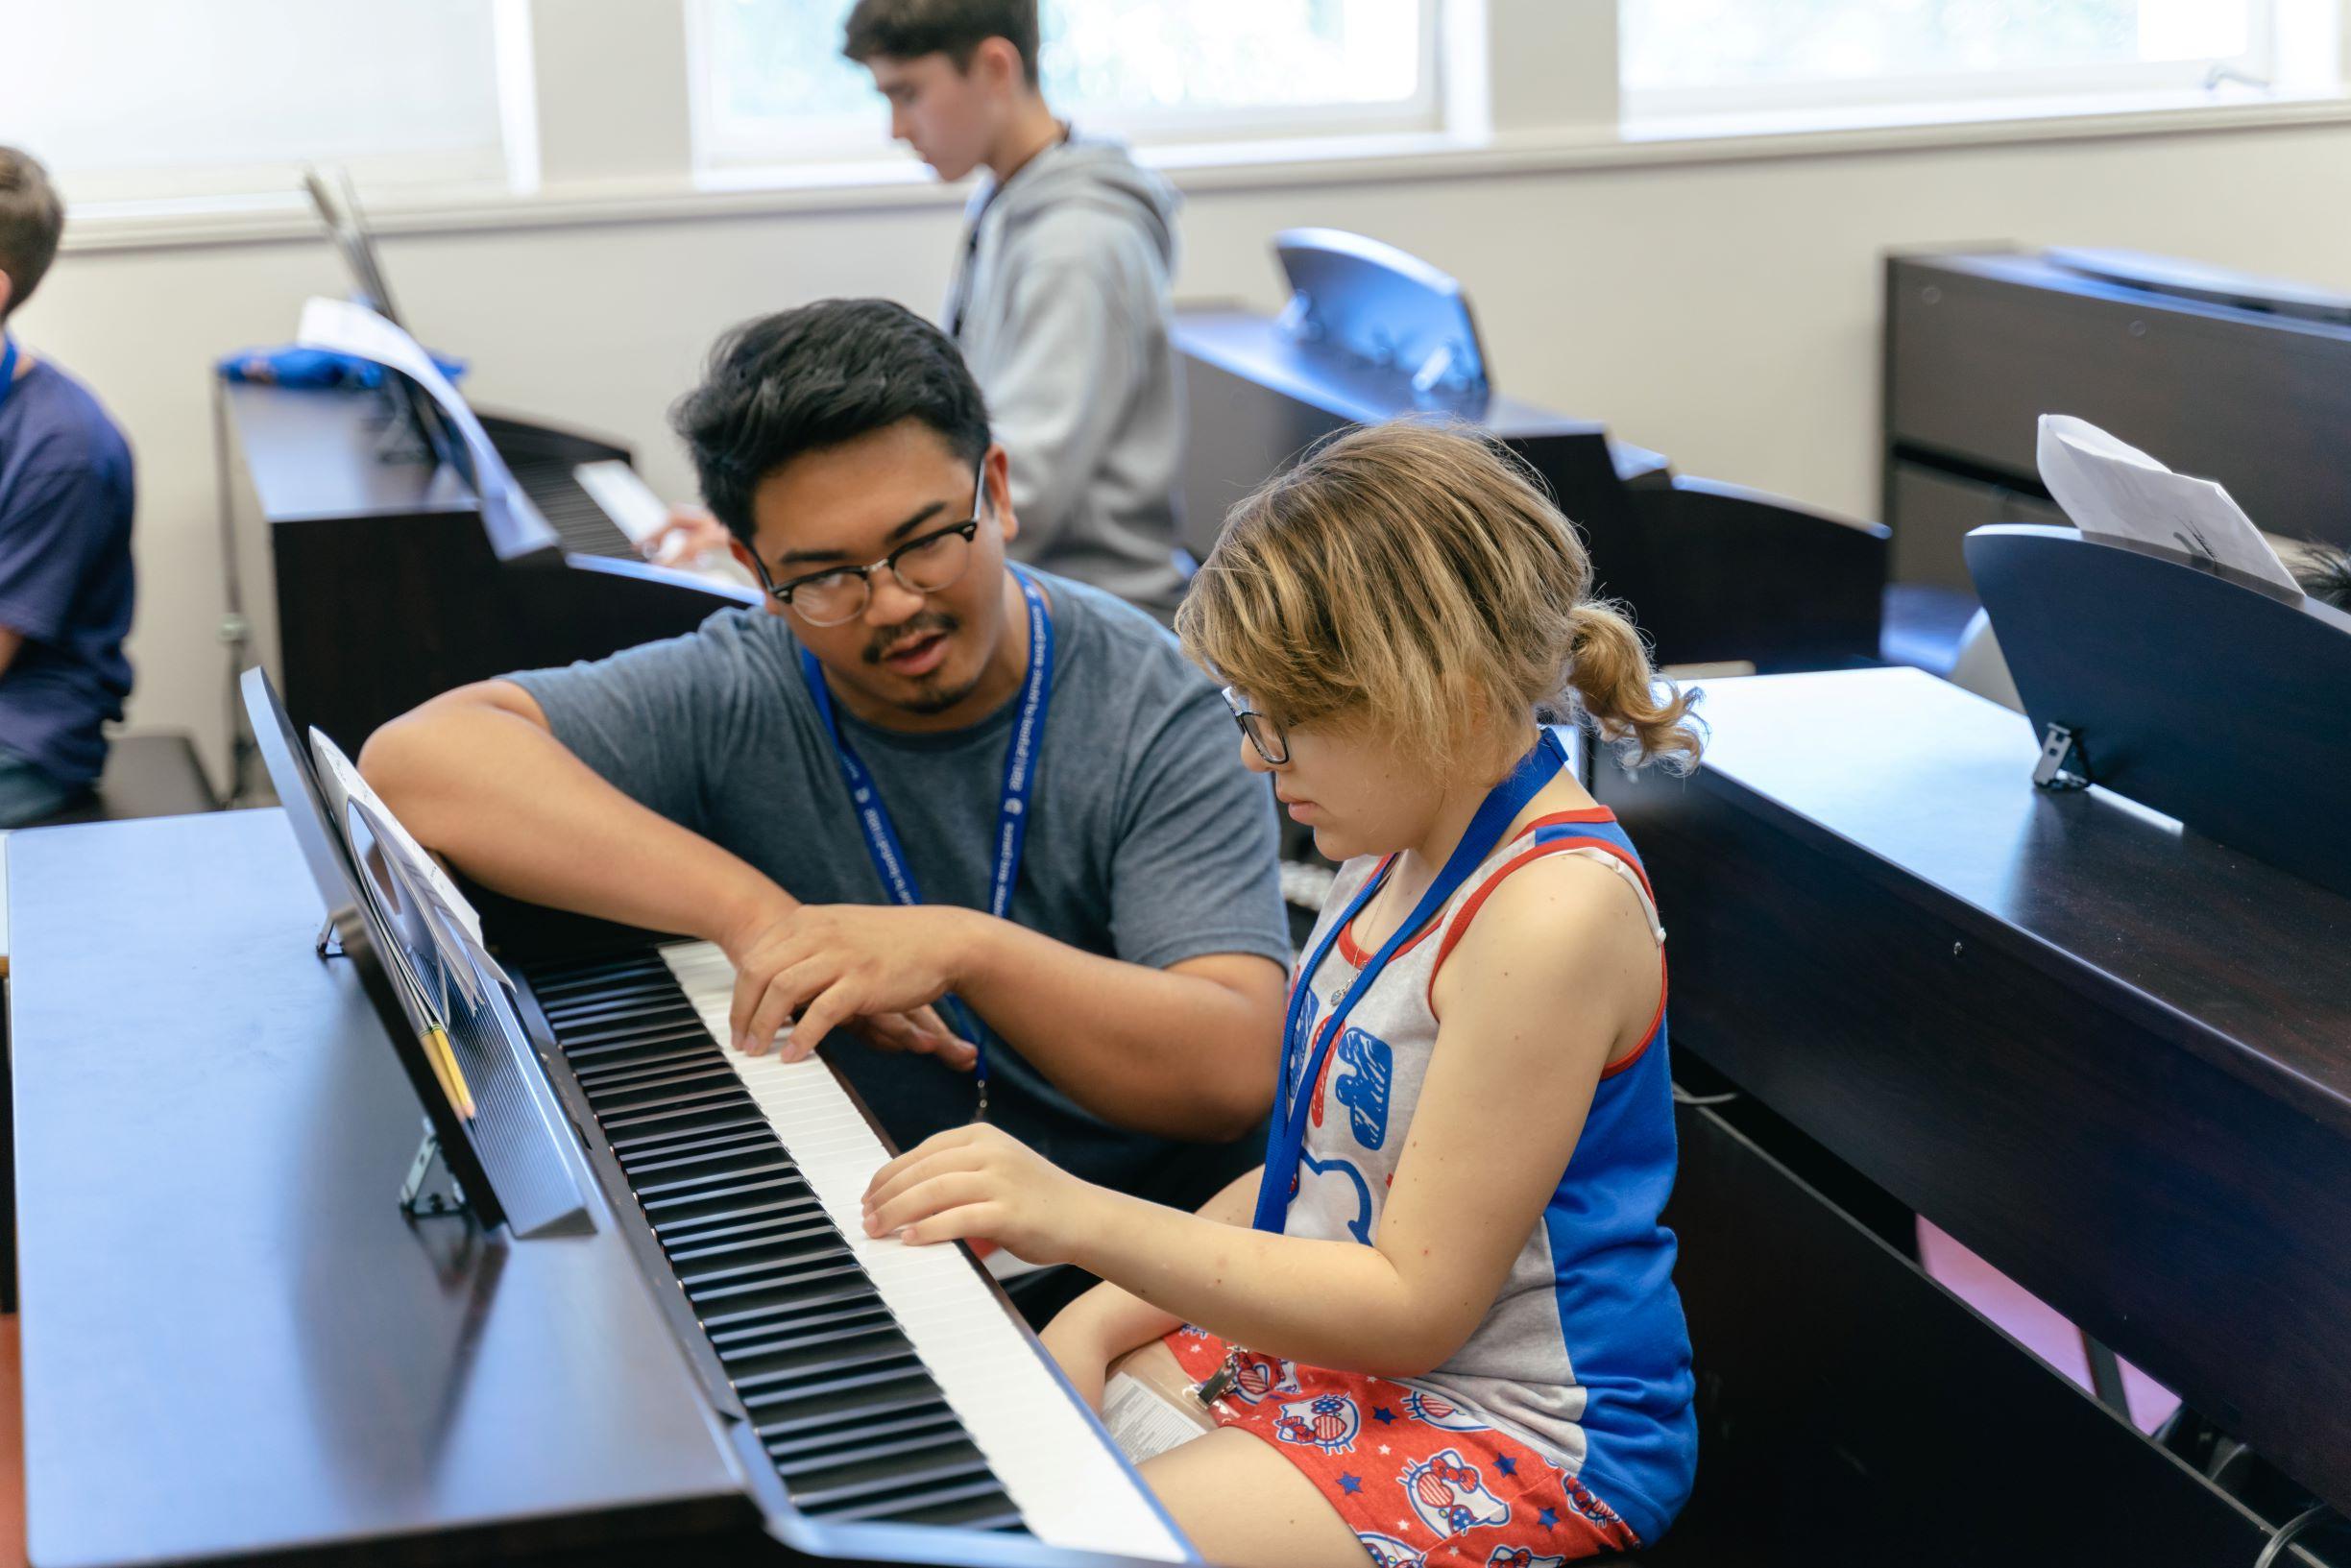 A teacher teaches a young student how to play the keyboard.